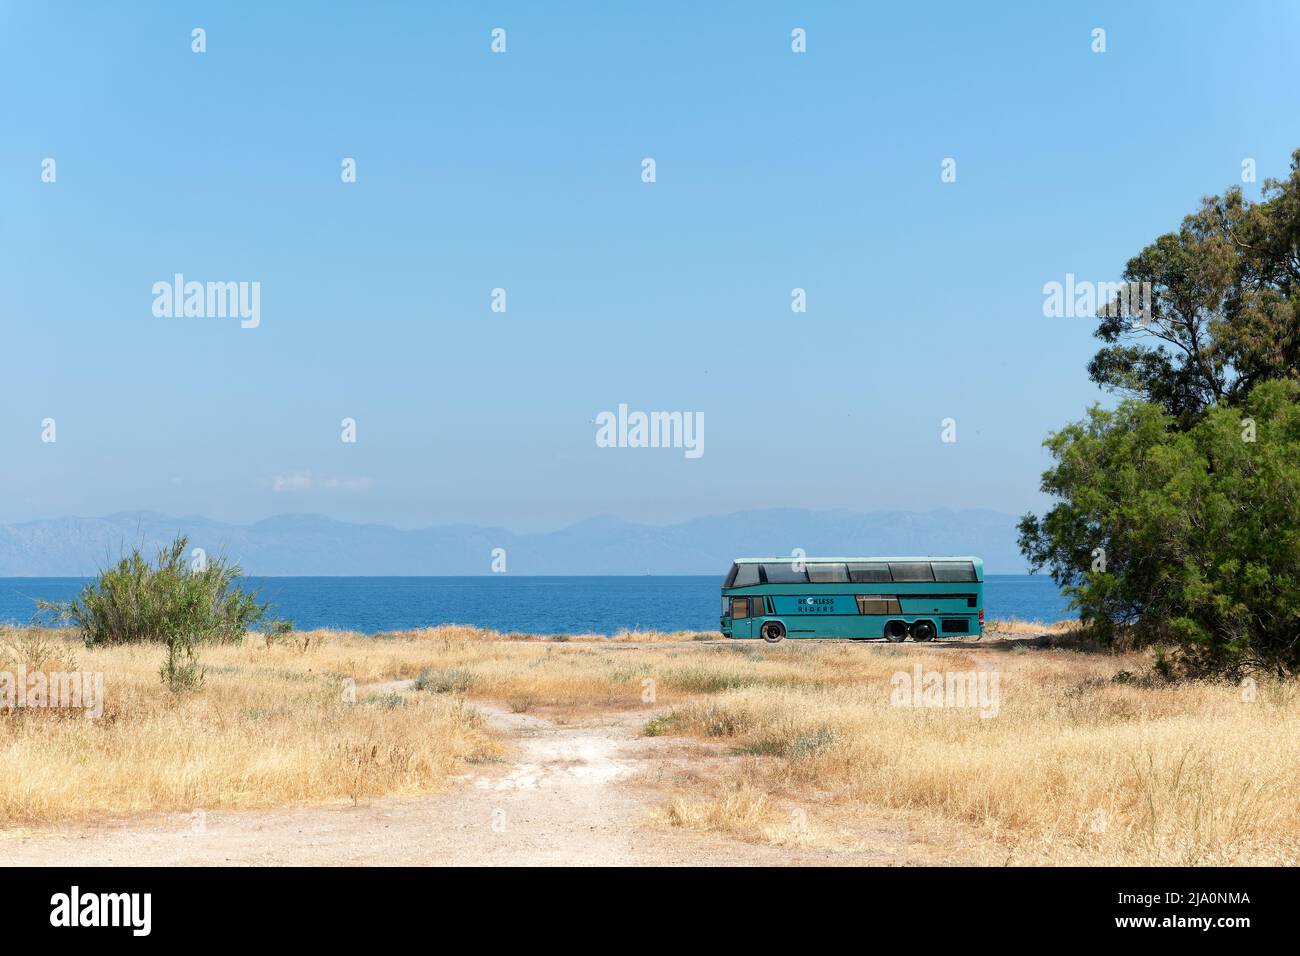 A passenger coach or bus stopped  on a a dirt road at the back of some scrub land on the edge of the Aegean Sea in Rhodes, Greece Stock Photo